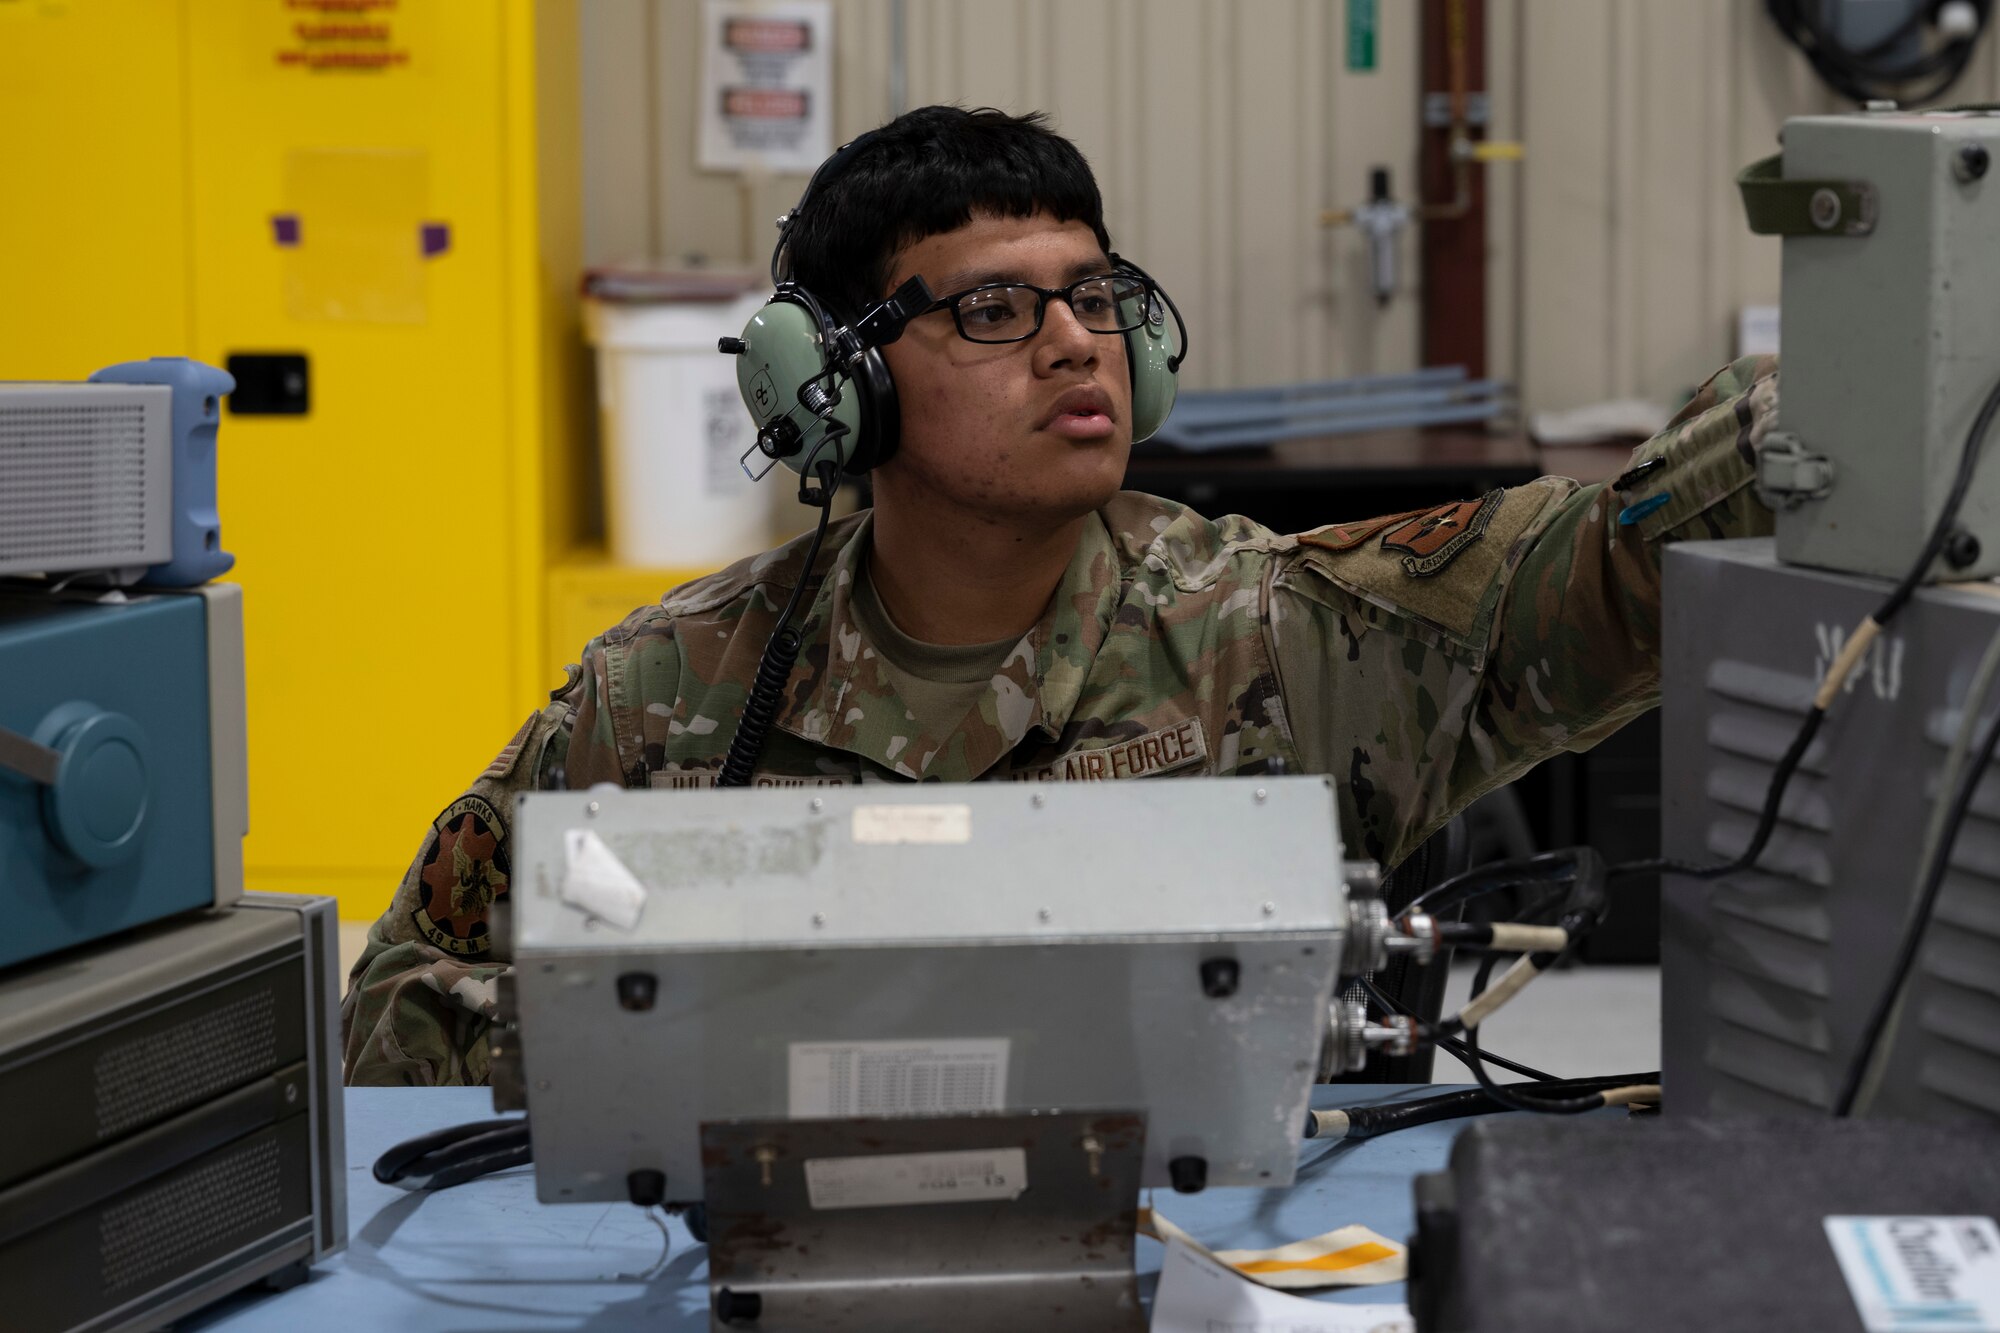 U.S. Air Force Airman 1st Class Jose Julio Aguilar, 49th Component Maintenance Squadron F-16 Viper avionics apprentice, tests an ultra-high frequency radio transmitter at Holloman Air Force Base, New Mexico, May 1, 2023. The 49th CMS avionics shop provides on and off-equipment maintenance support for assigned F-16 aircraft enabling pilot production. (U.S. Air Force photo by Airman 1st Class Michelle Ferrari)